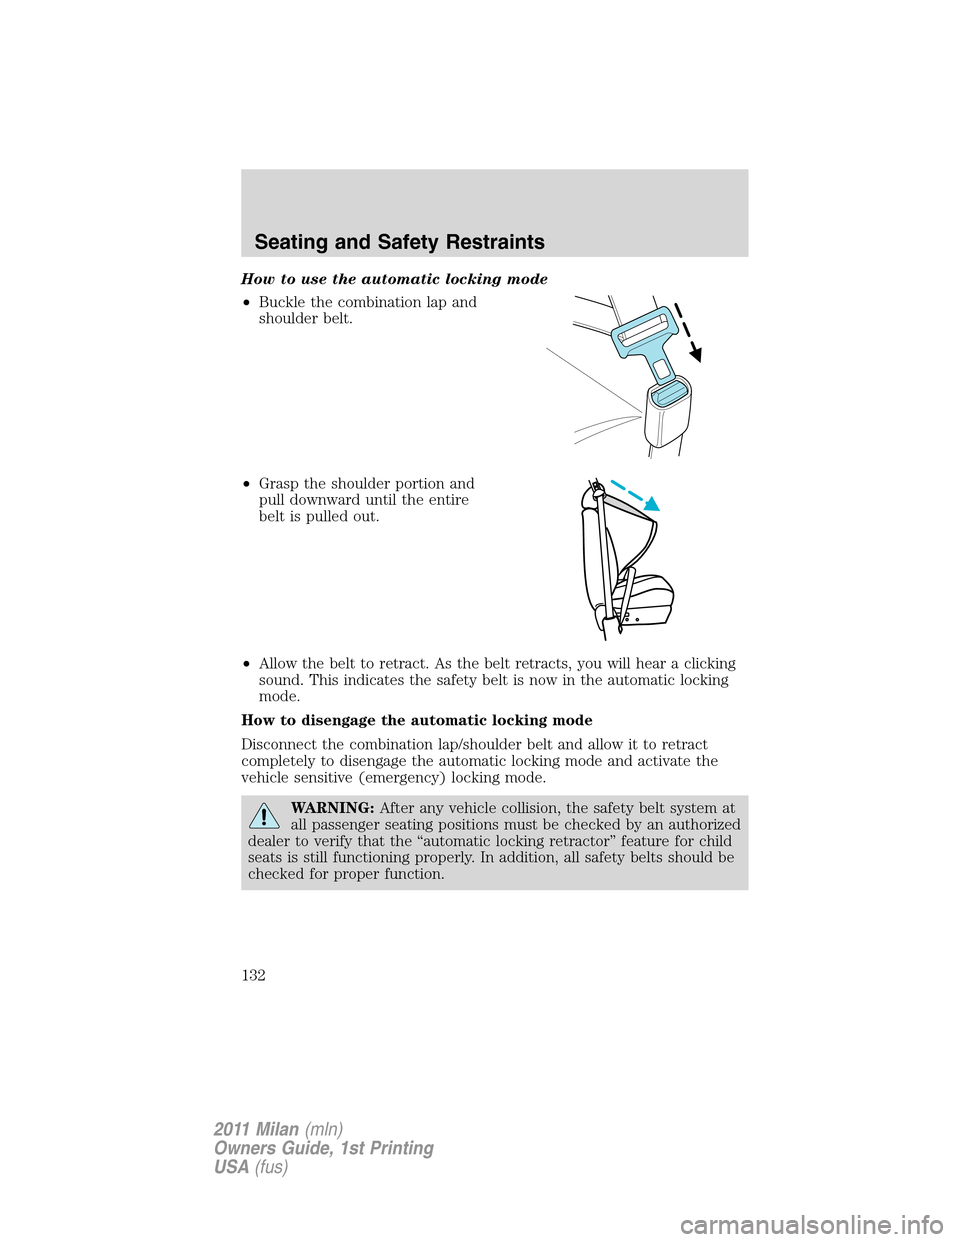 Mercury Milan 2011  Owners Manuals How to use the automatic locking mode
•Buckle the combination lap and
shoulder belt.
•Grasp the shoulder portion and
pull downward until the entire
belt is pulled out.
•Allow the belt to retract